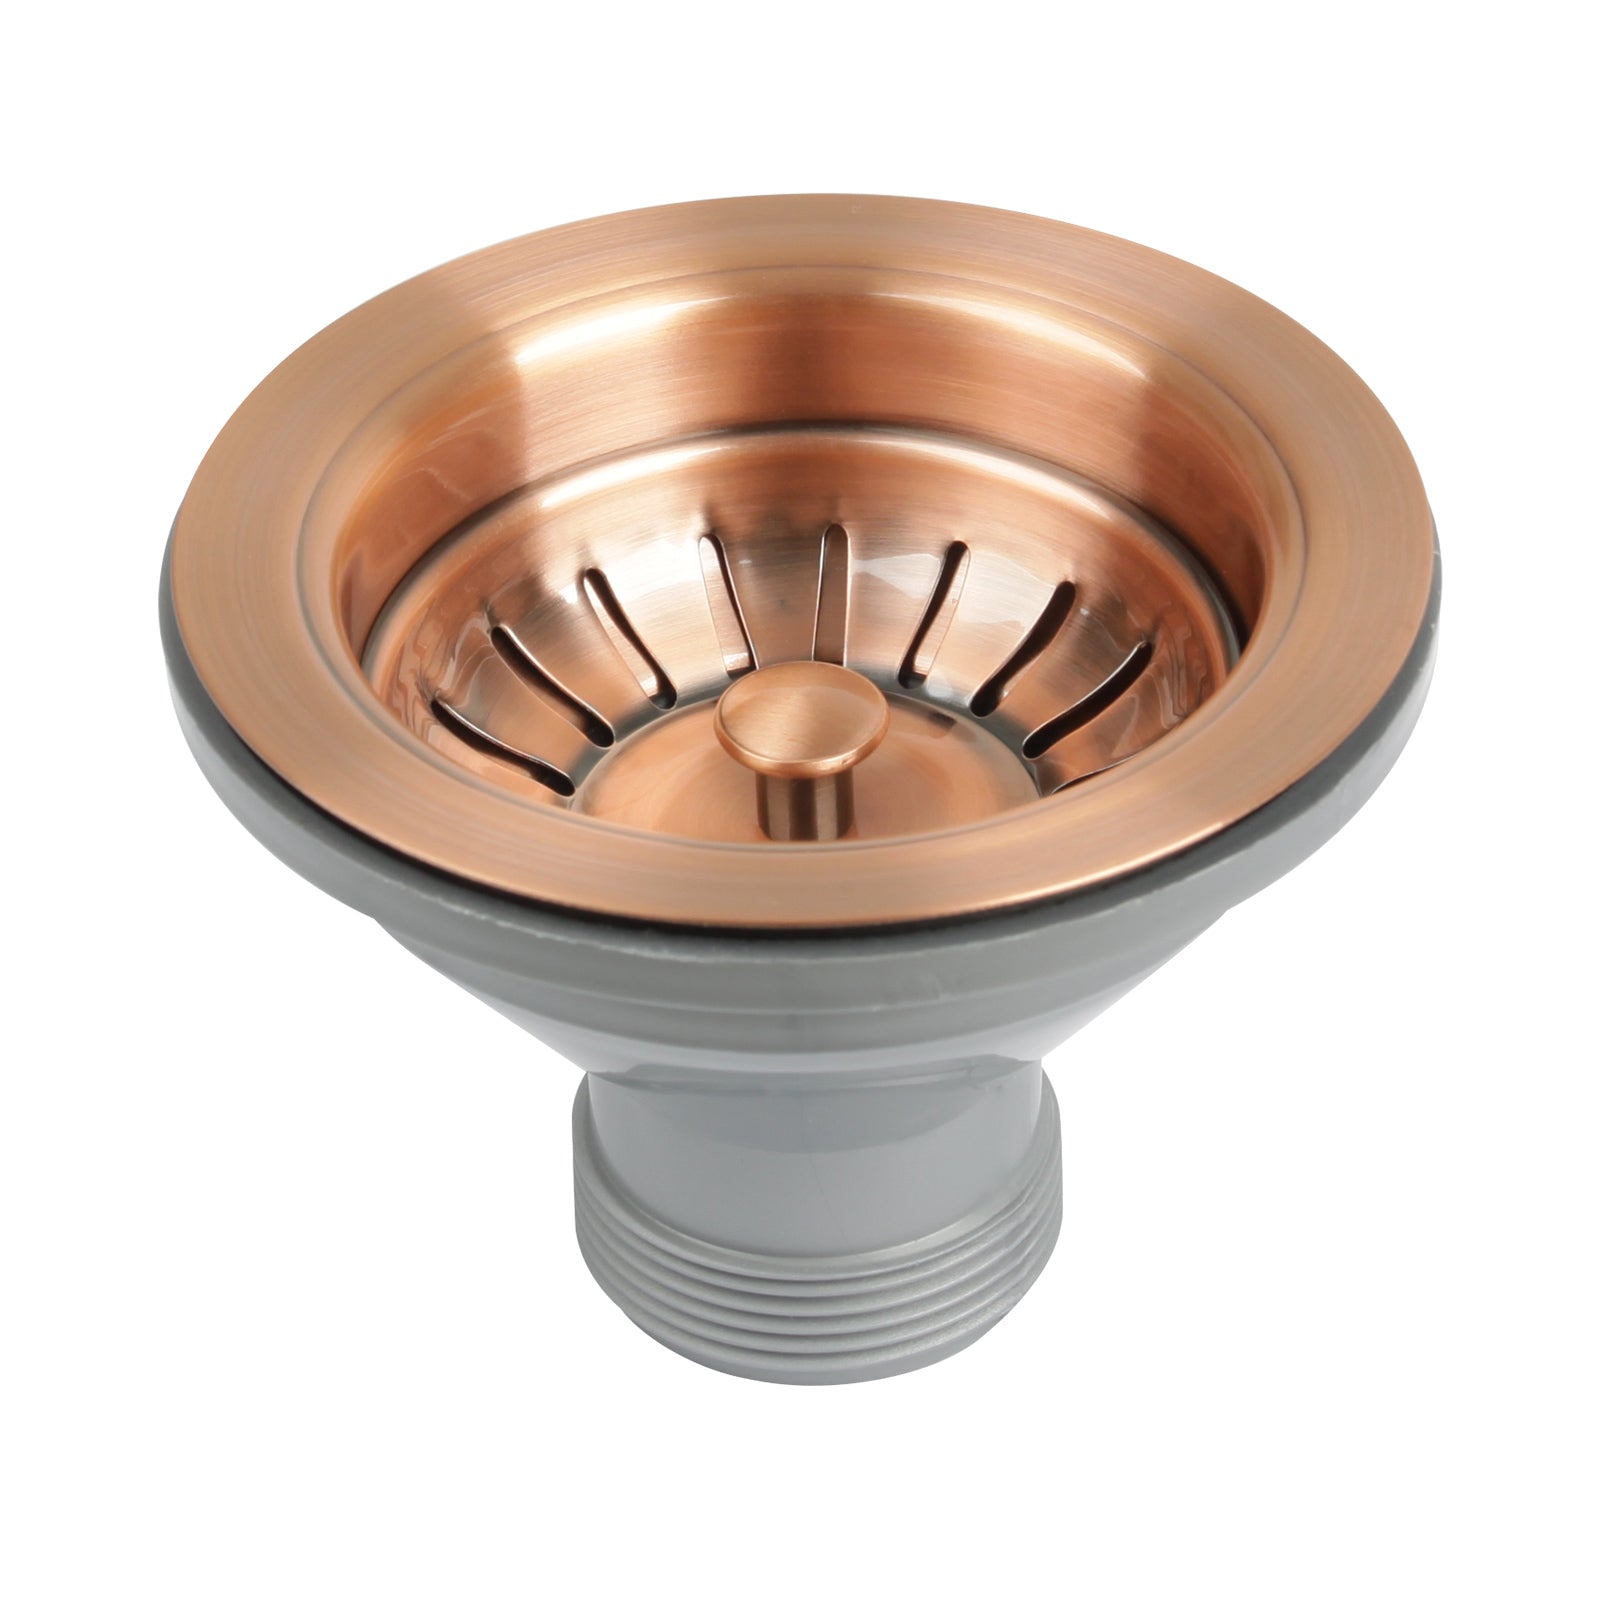 Copper Kitchen Sink Stopper Replacement for 3-1/2 Inch Standard Strainer Drain - AK82102C